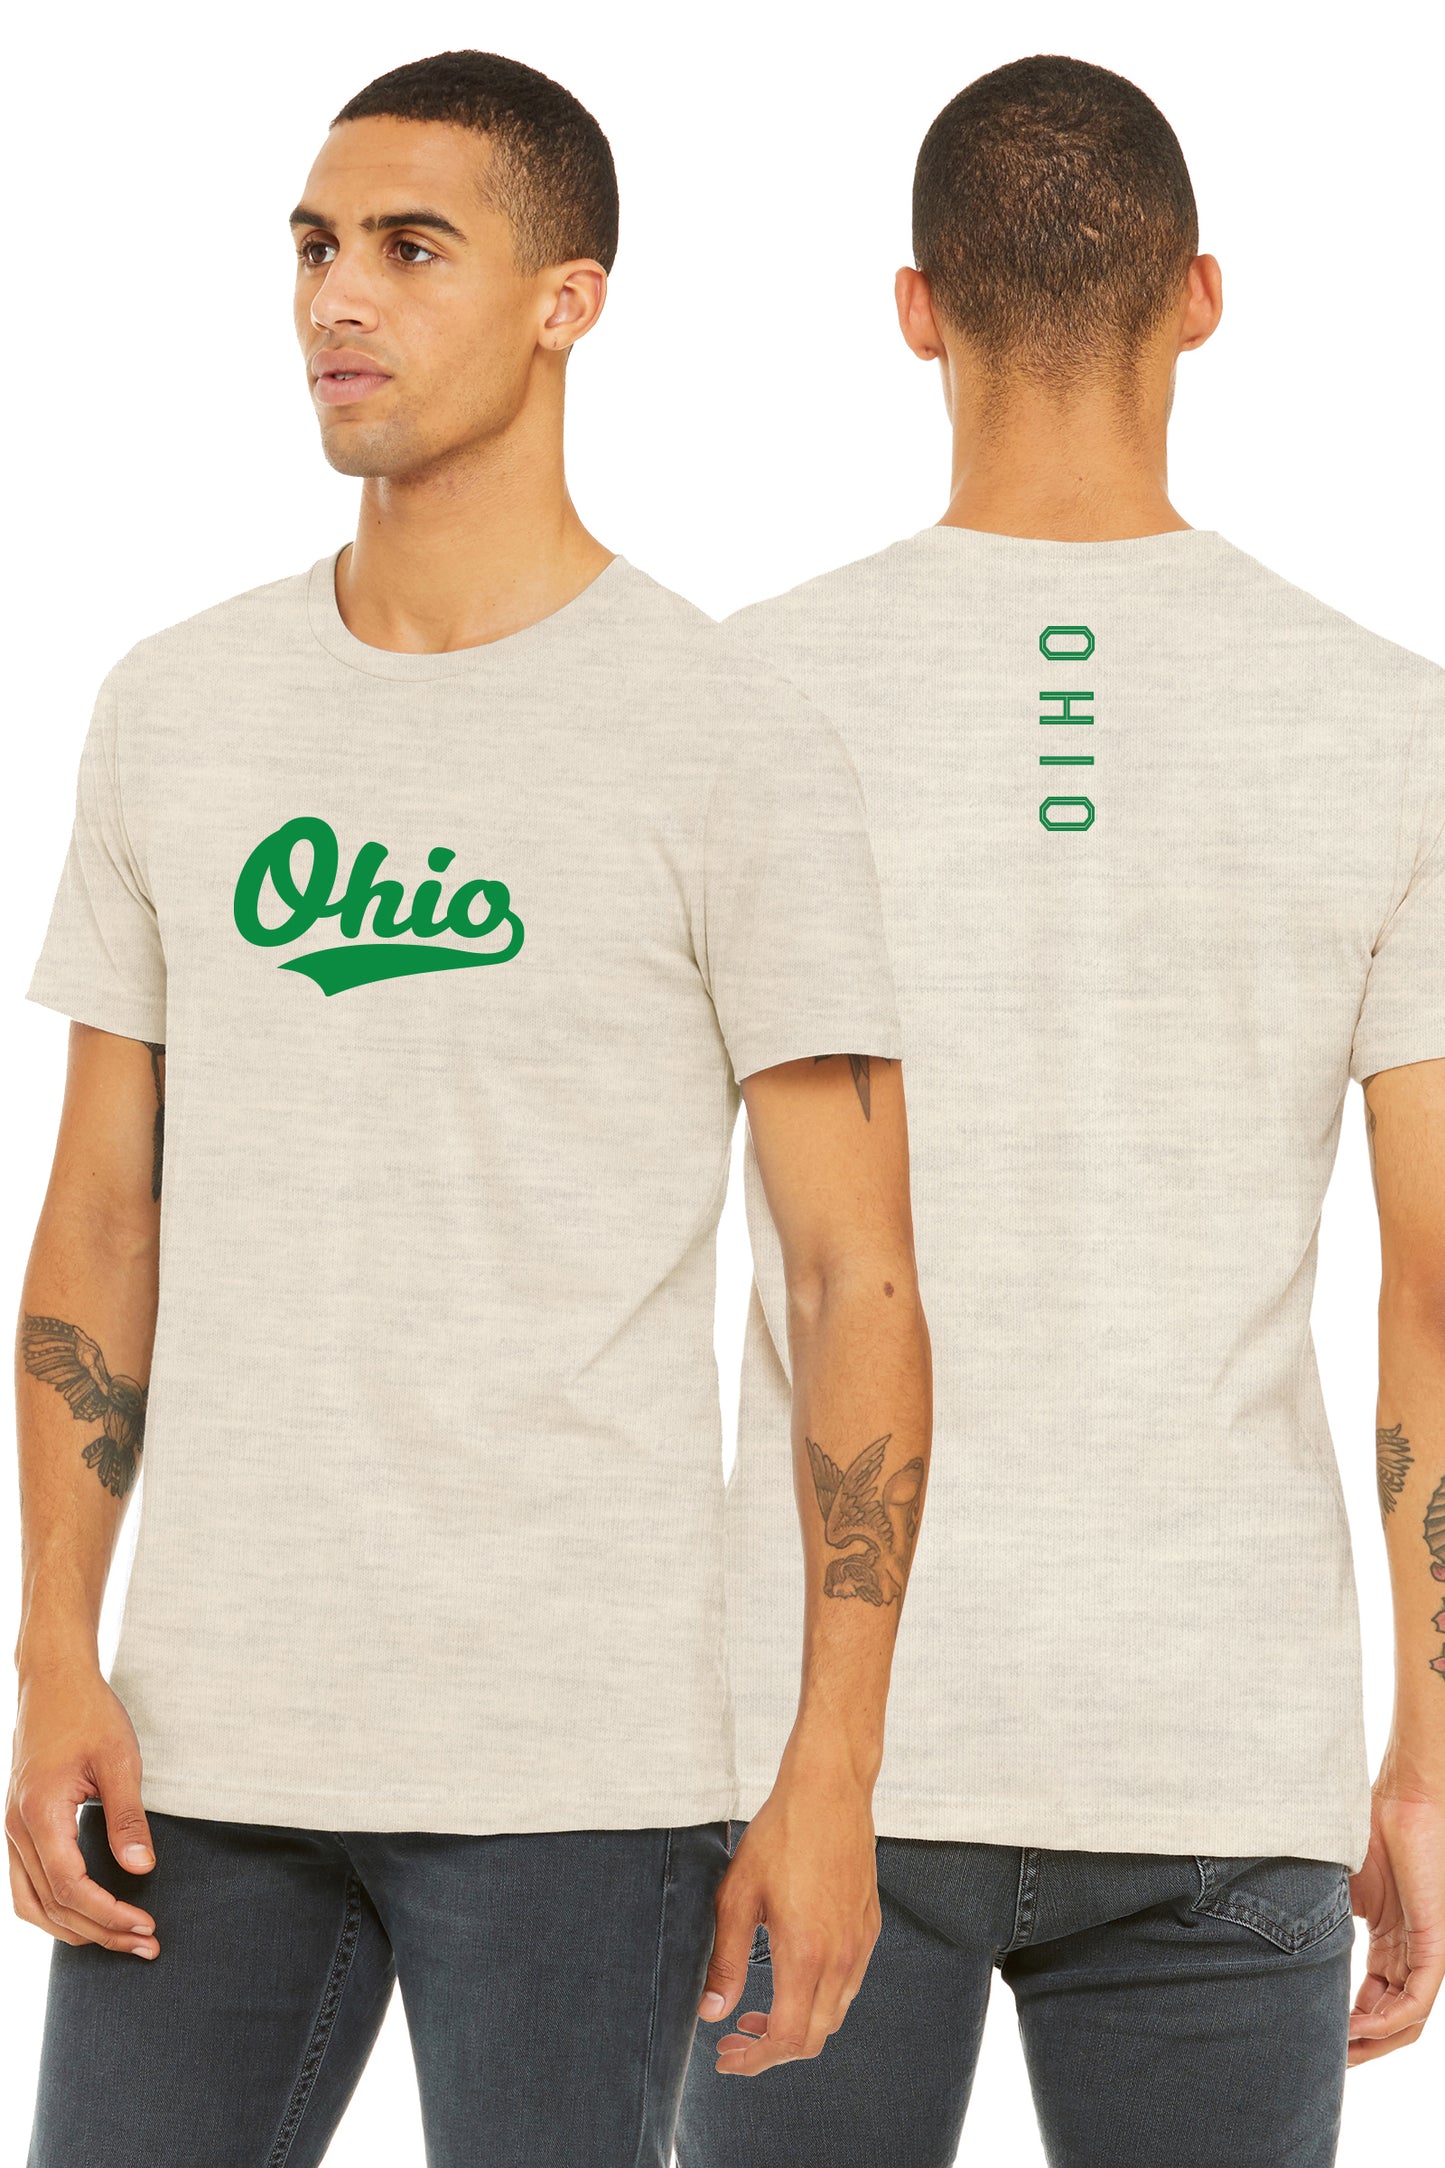 Daxton Adult Unisex Tshirt Ohio Script with Vertical on the Back